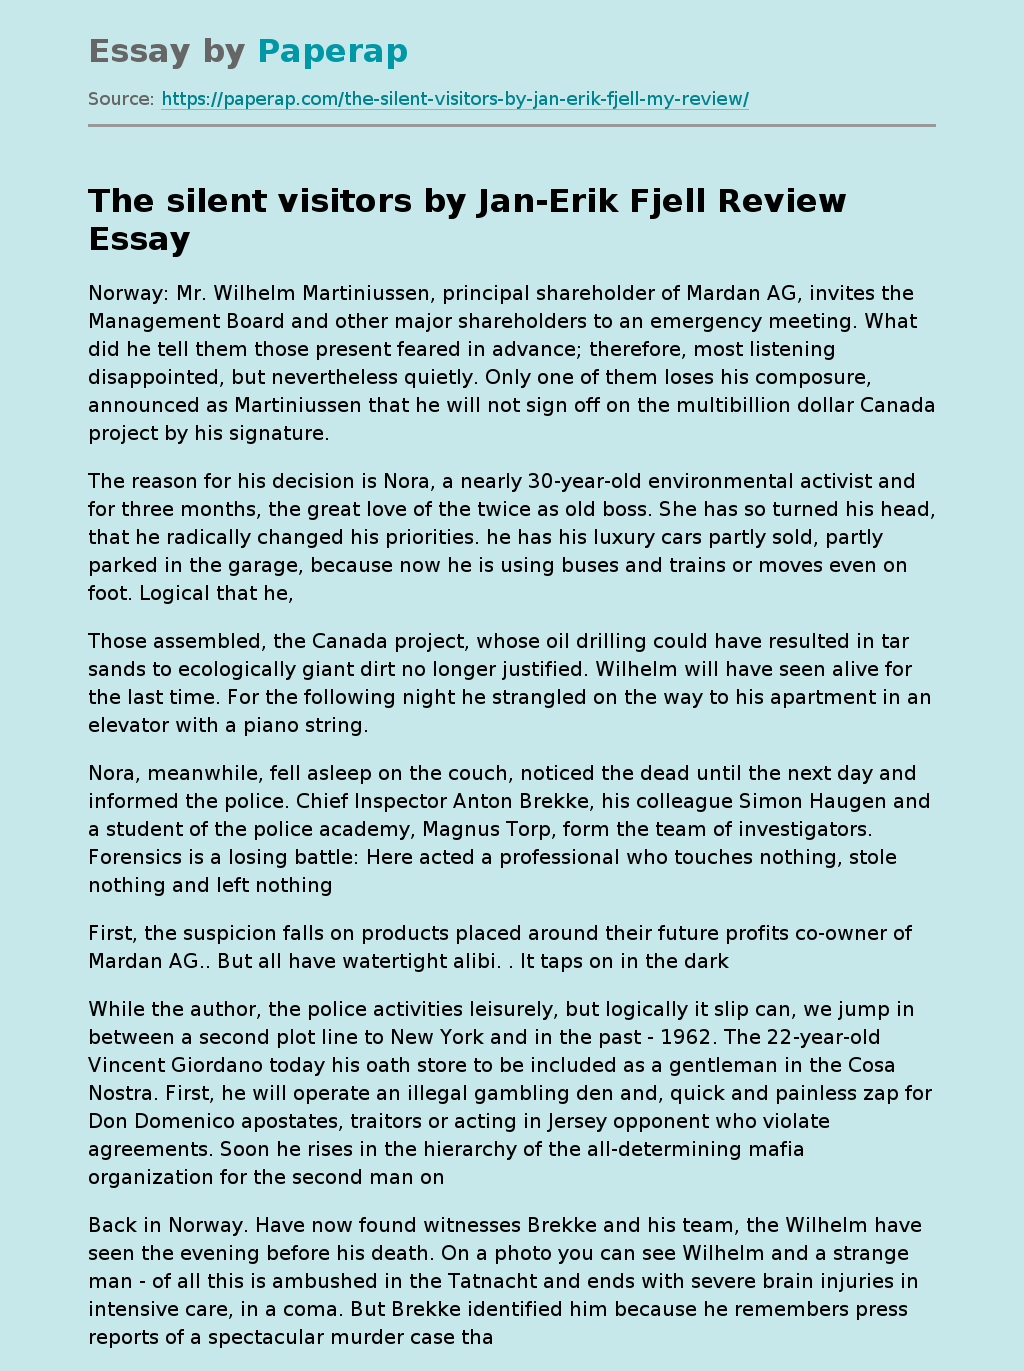 The Silent Visitors By Jan-erik Fjell Review